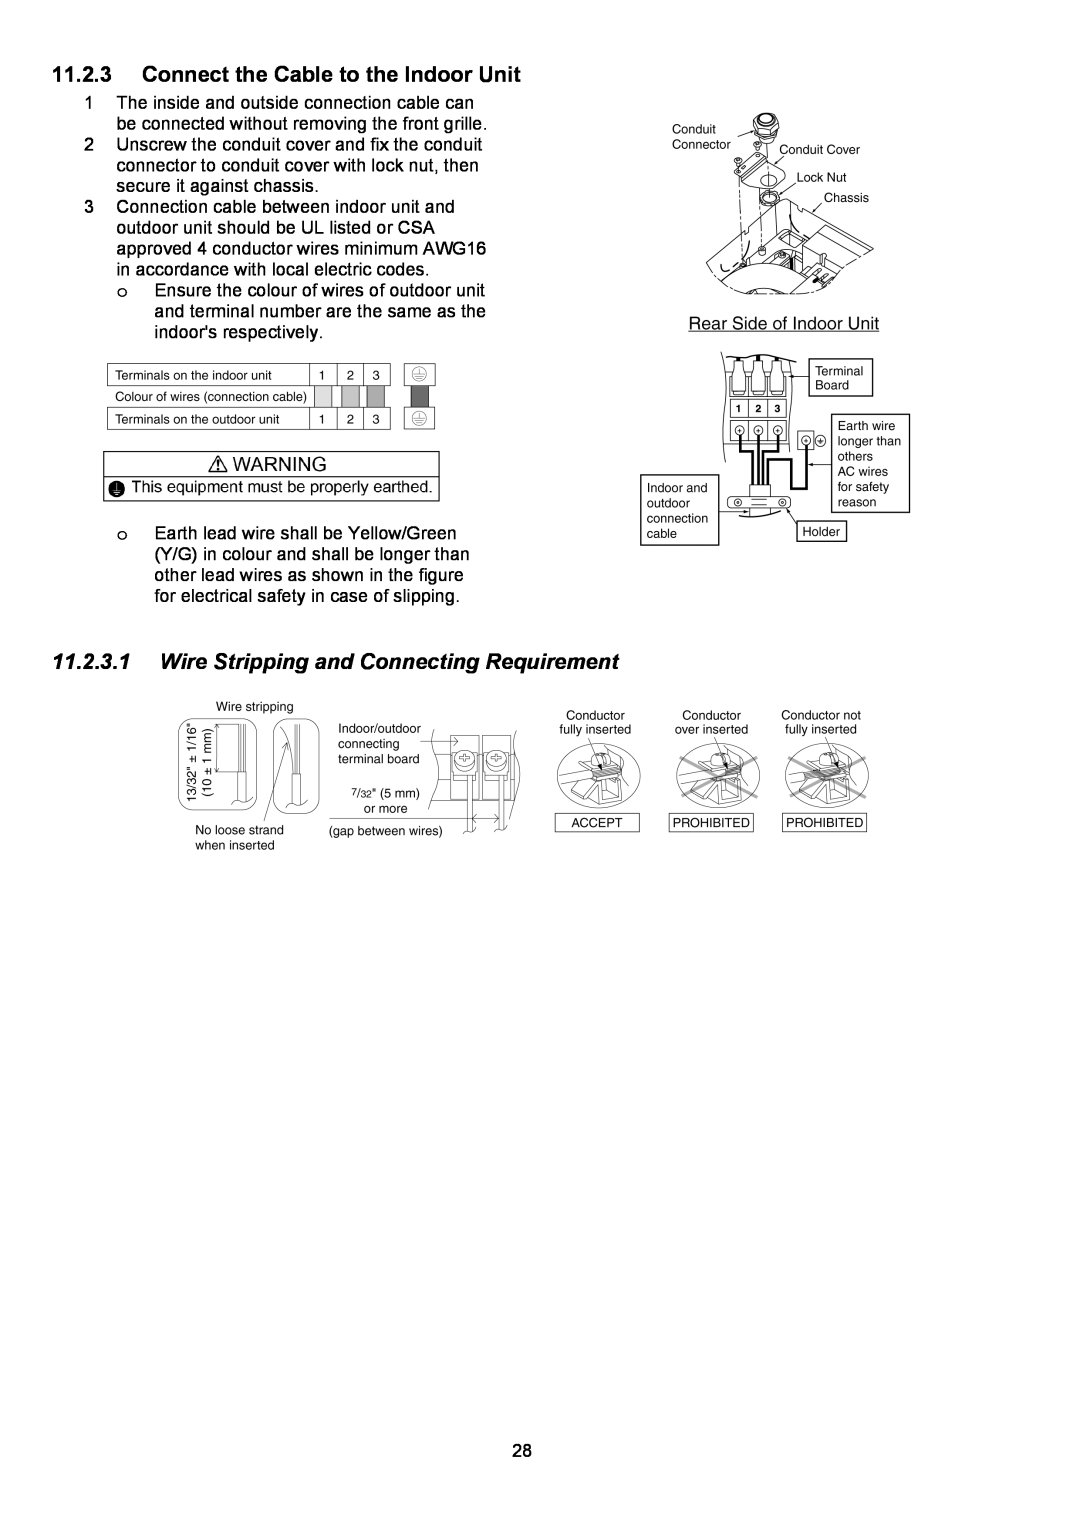 Panasonic CS-XE12PKUA manual 11.2.3Connect the Cable to the Indoor Unit, 11.2.3.1Wire Stripping and Connecting Requirement 